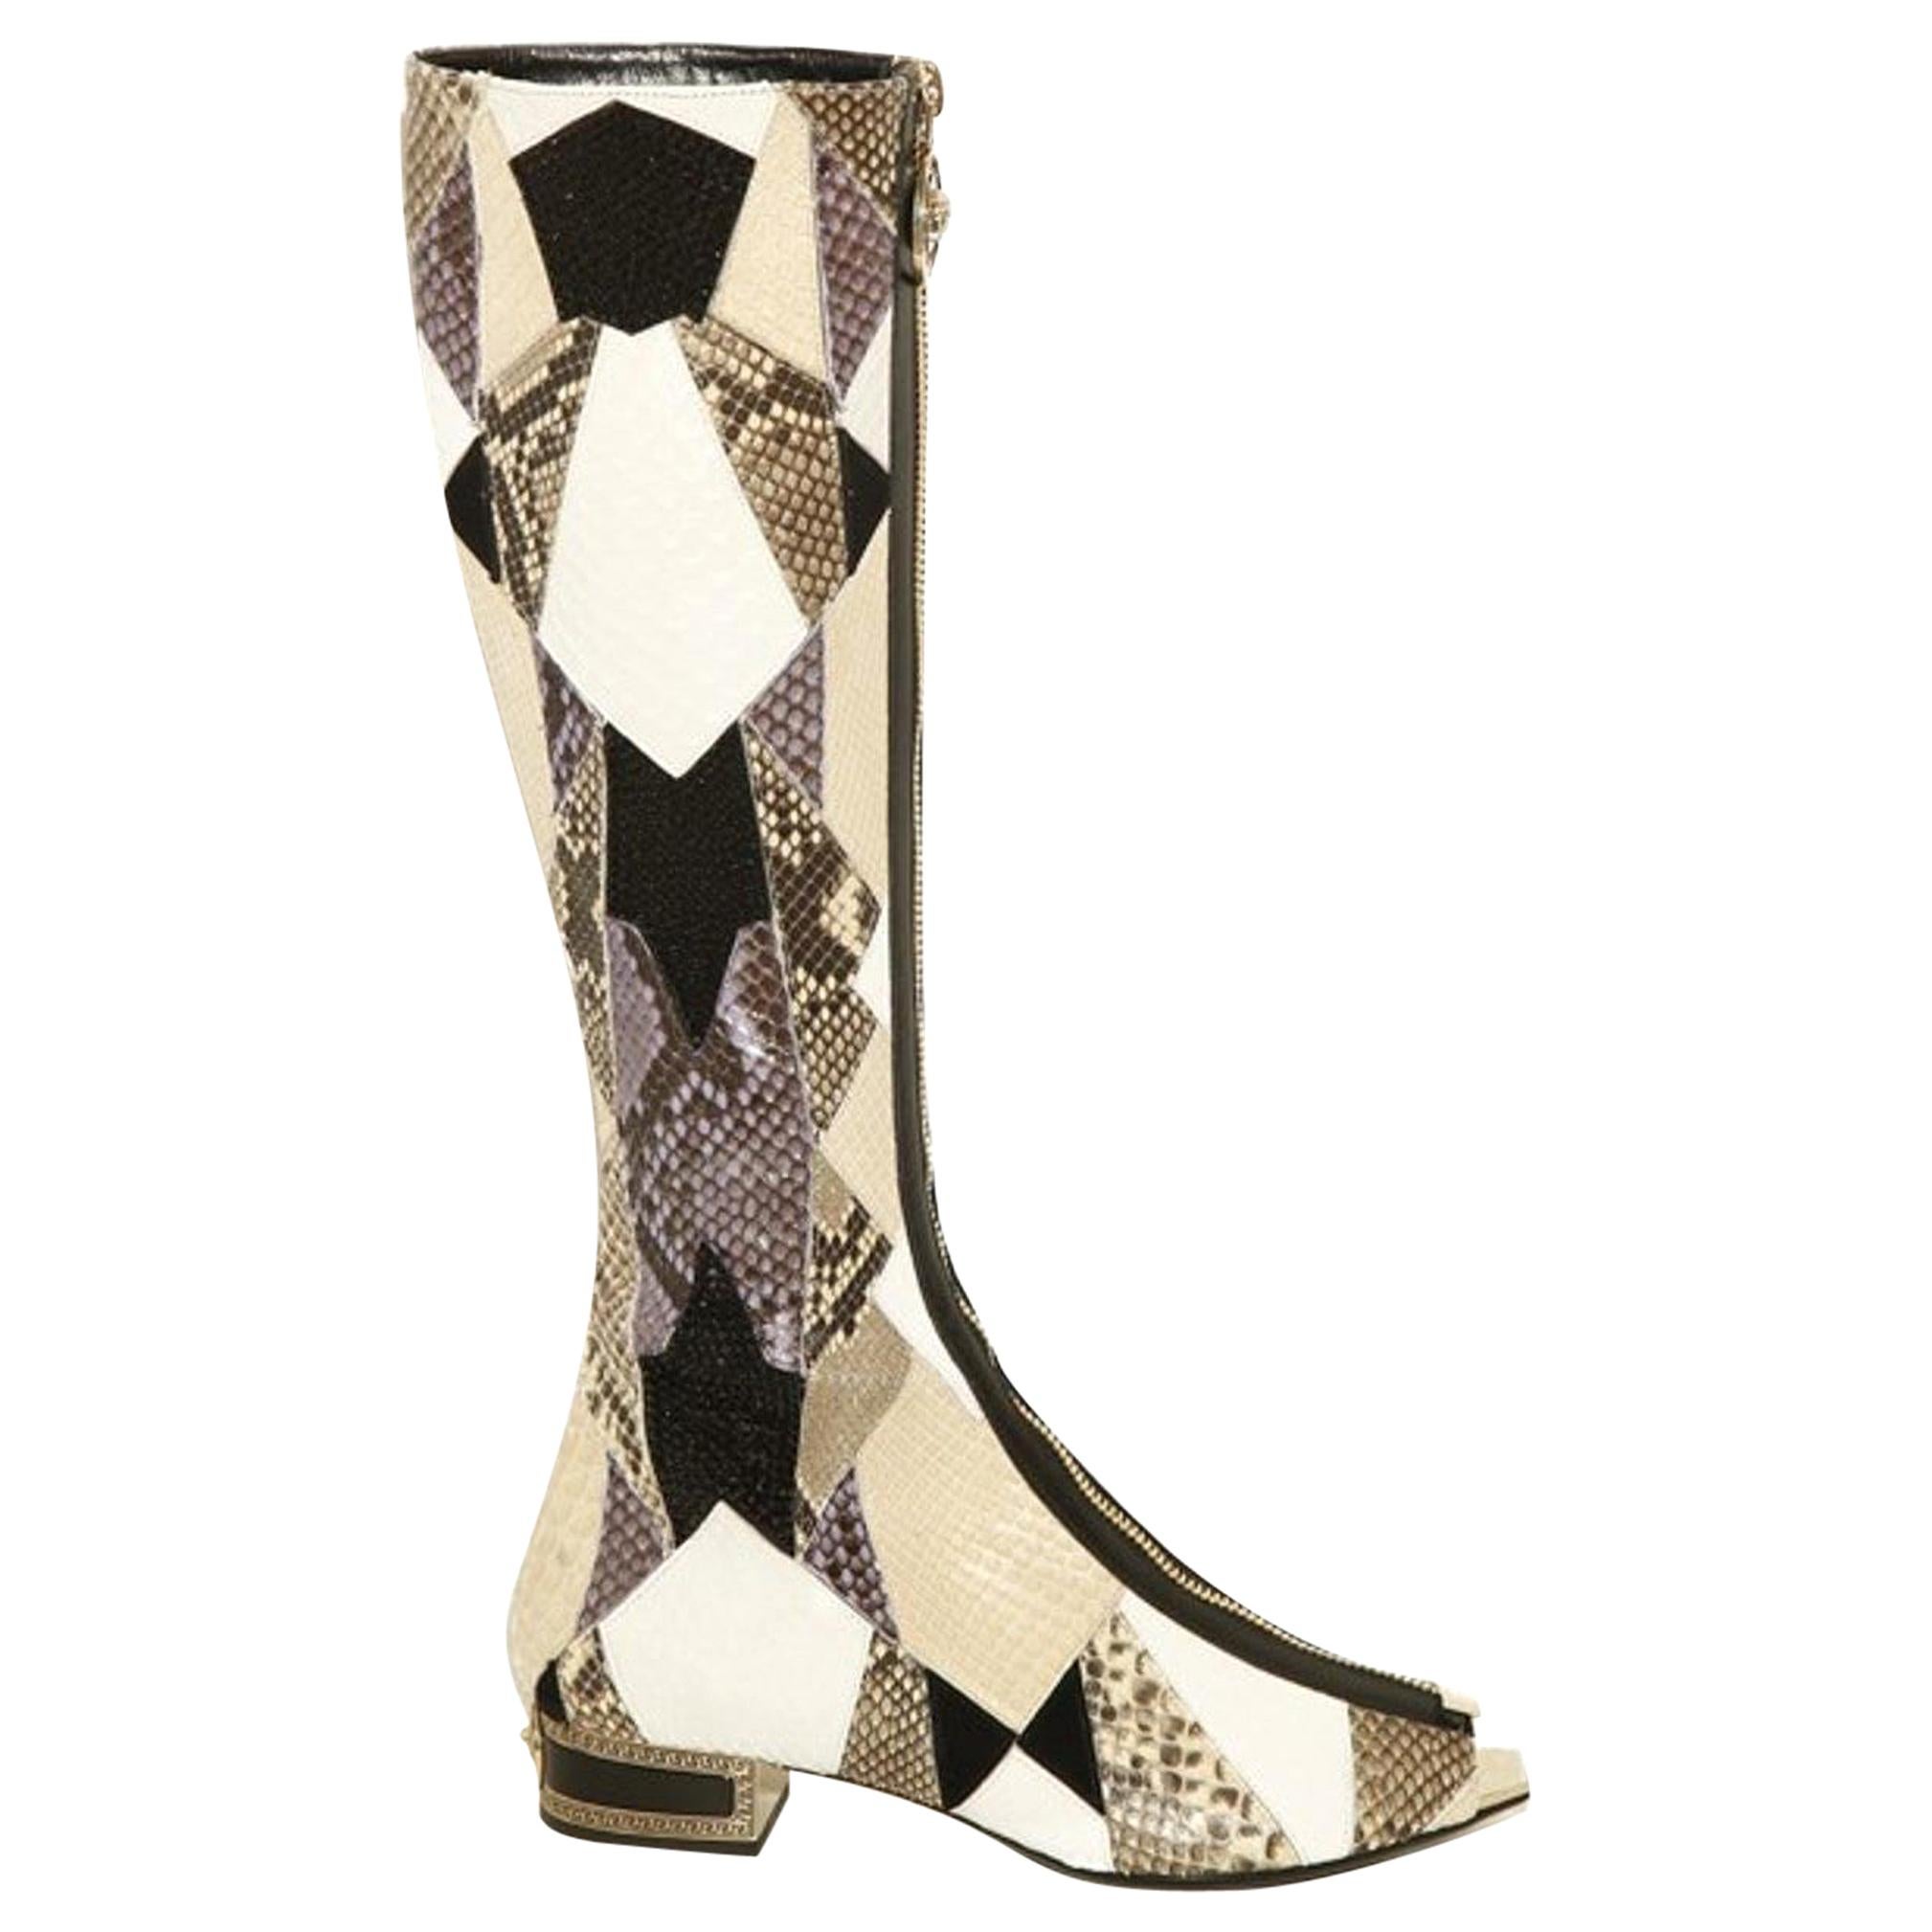 New VERSACE Crystal Embelished Python Gladiator Boots with open toe 37